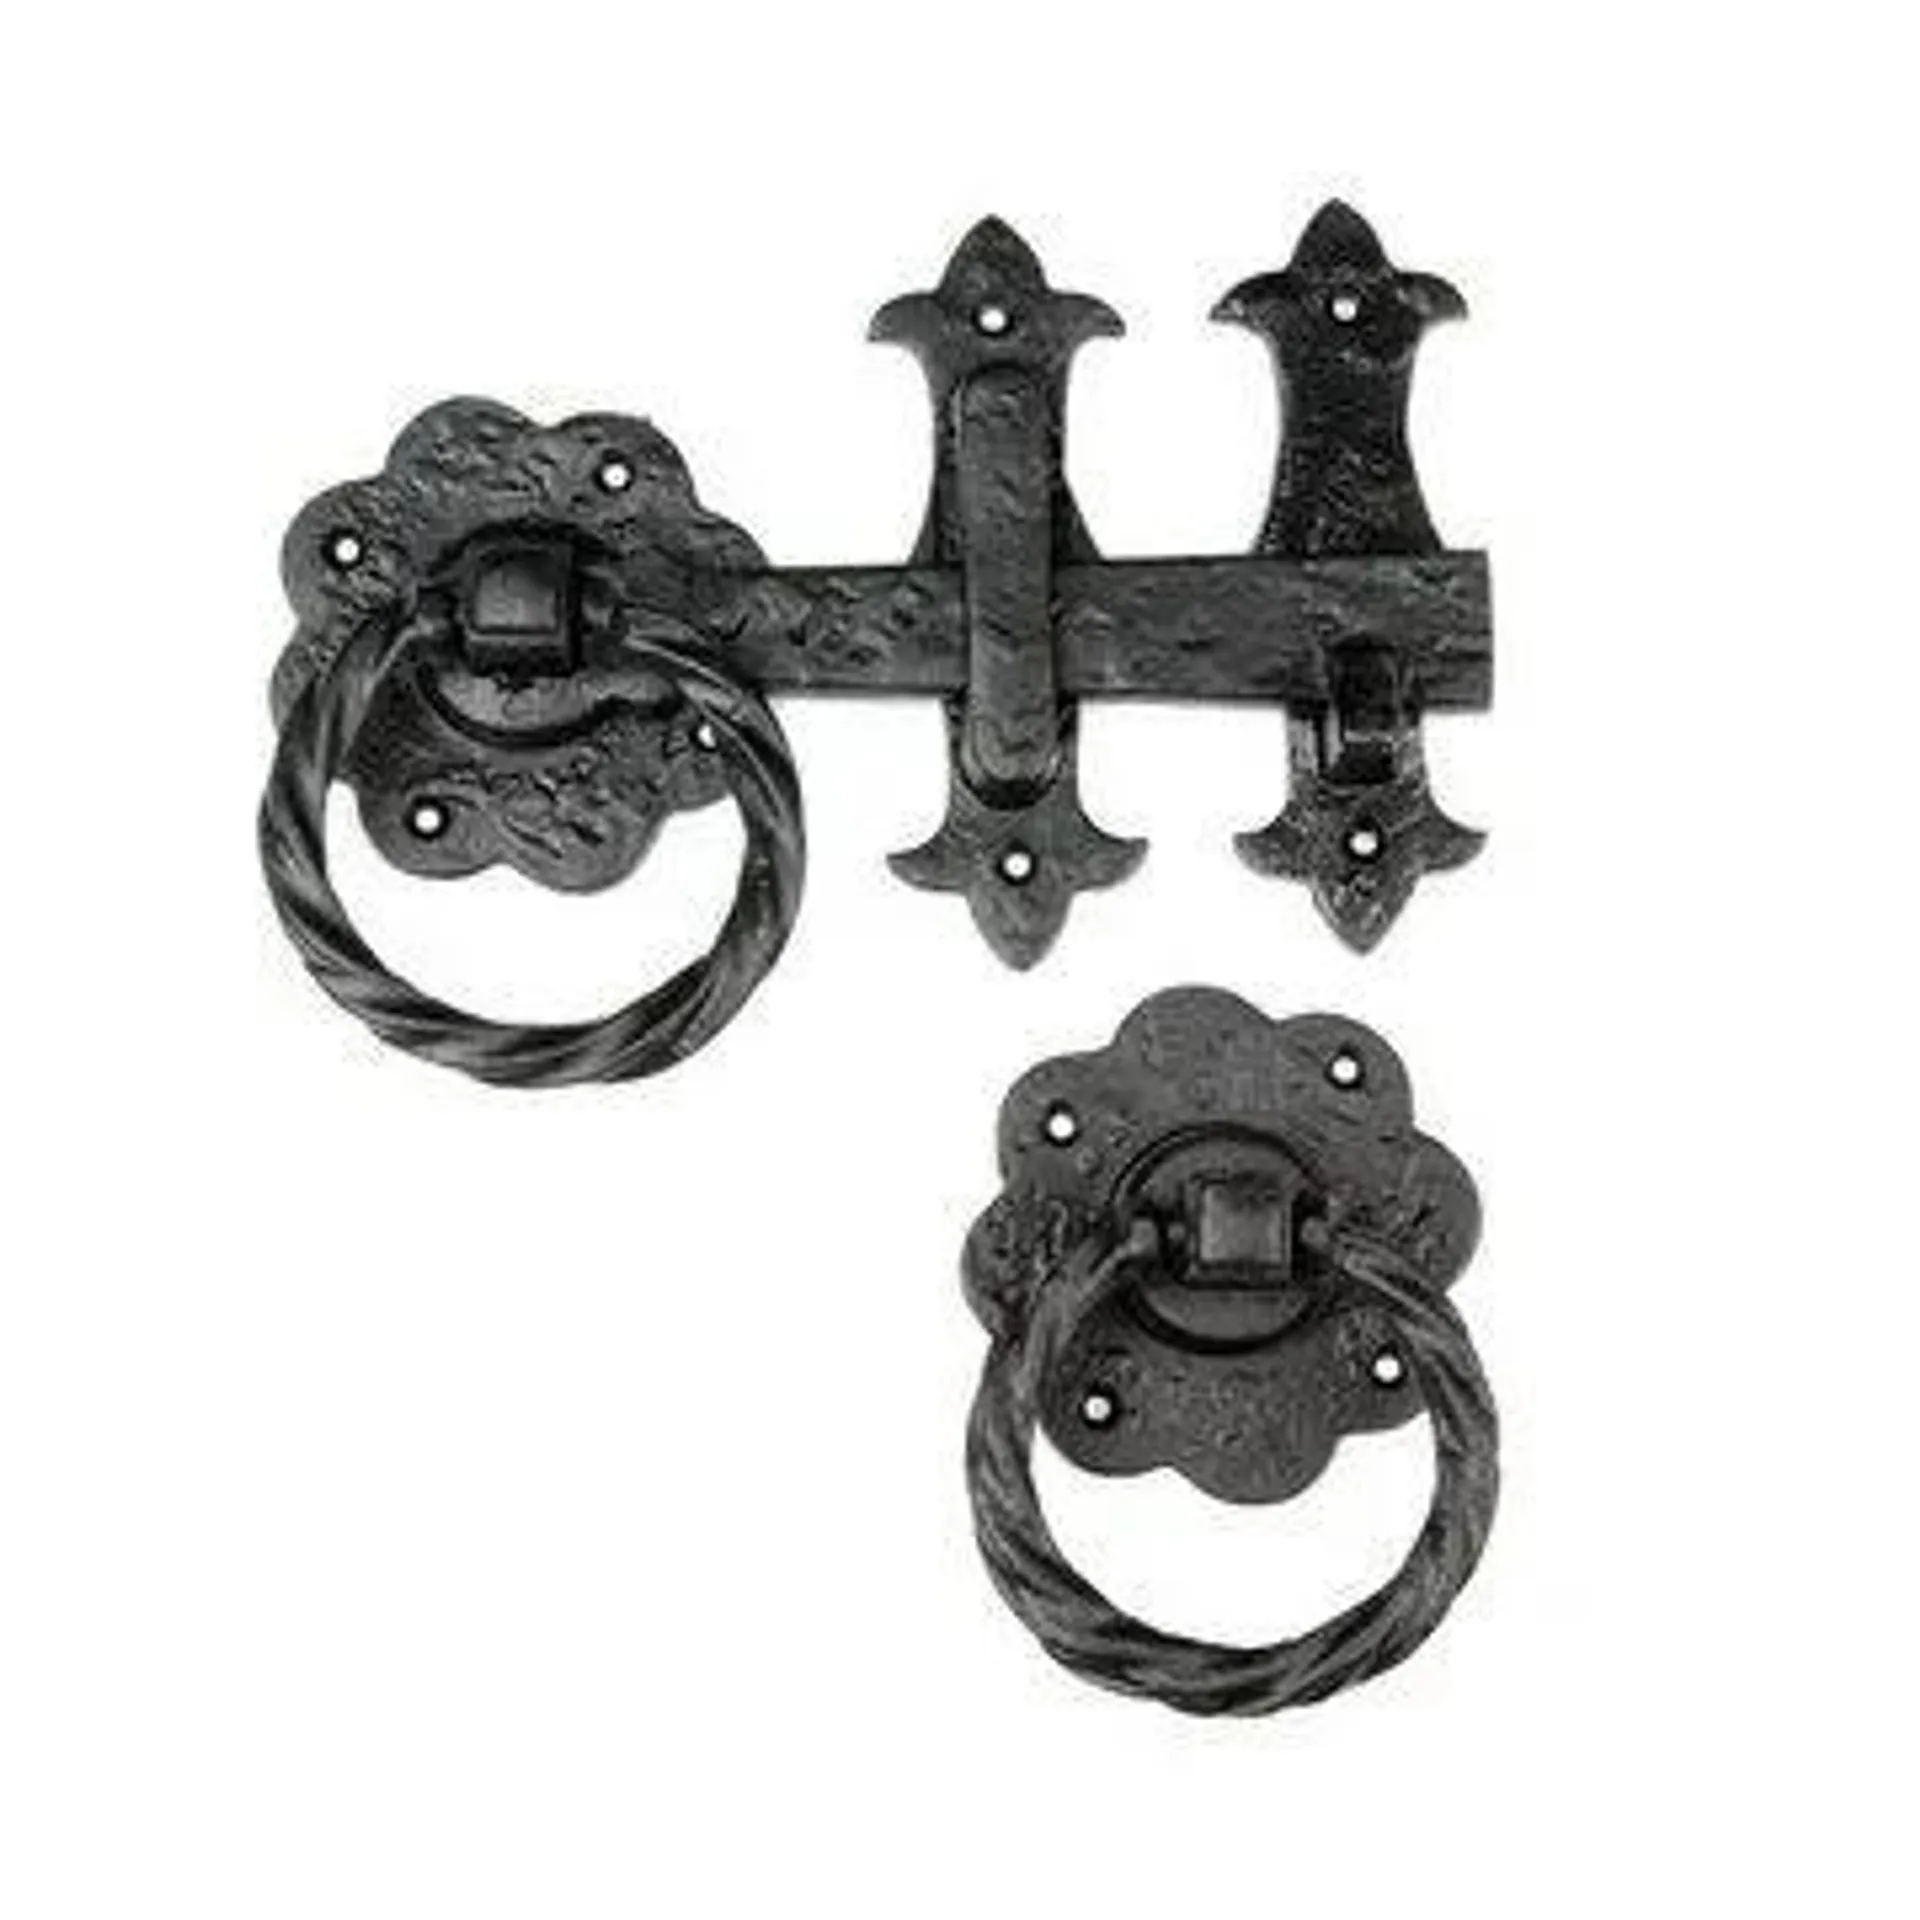 Restorers Gate Latch Set With Ring Handle